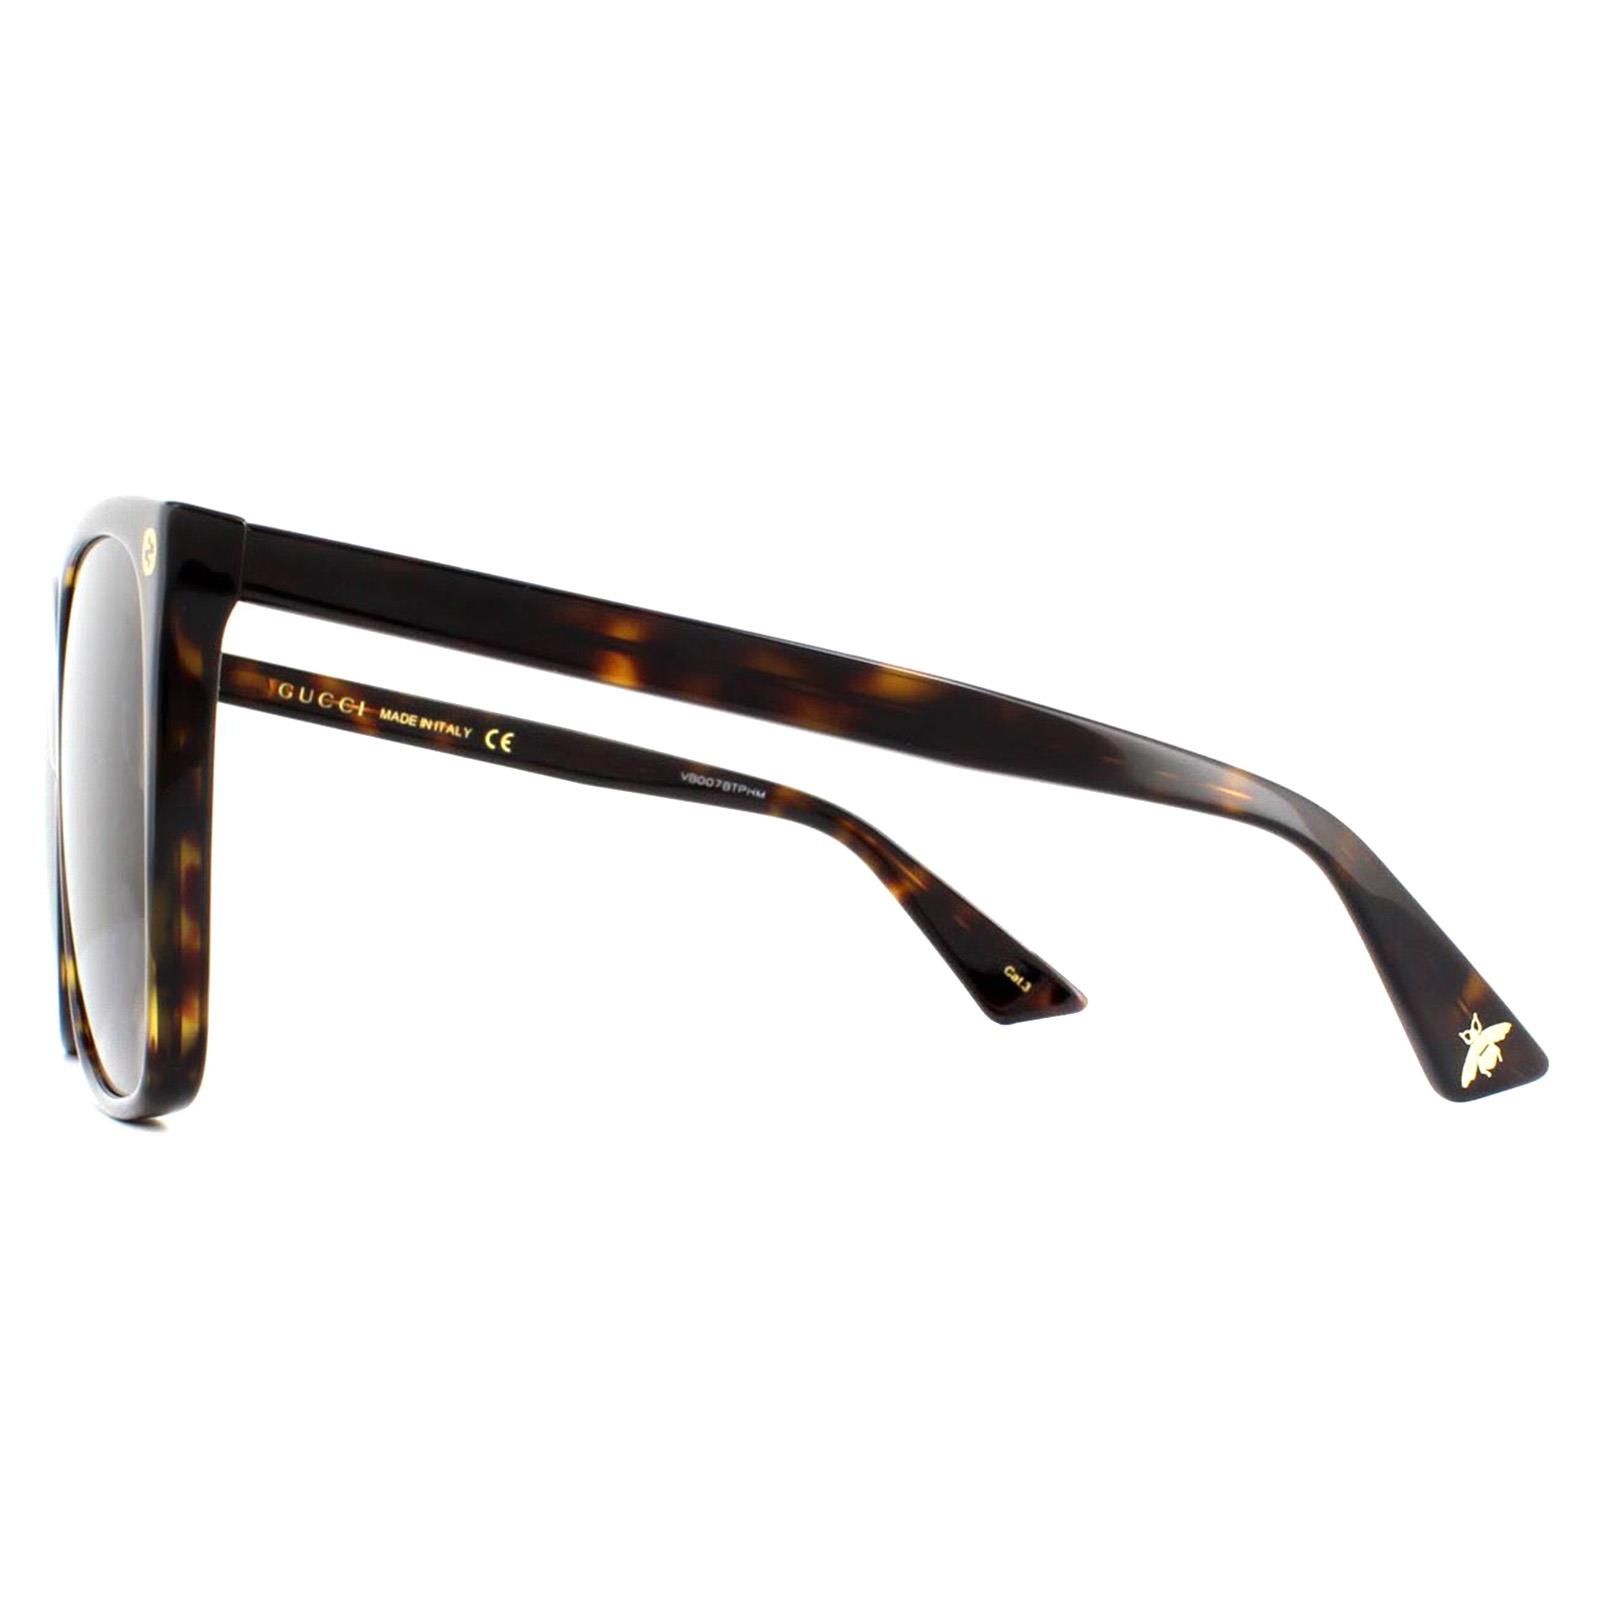 Gucci Sunglasses GG0022S 003 Havana Grey Gradient have a simple squared off shape with the stylish GG logos at the front temples and a bee detail on the temple tip.